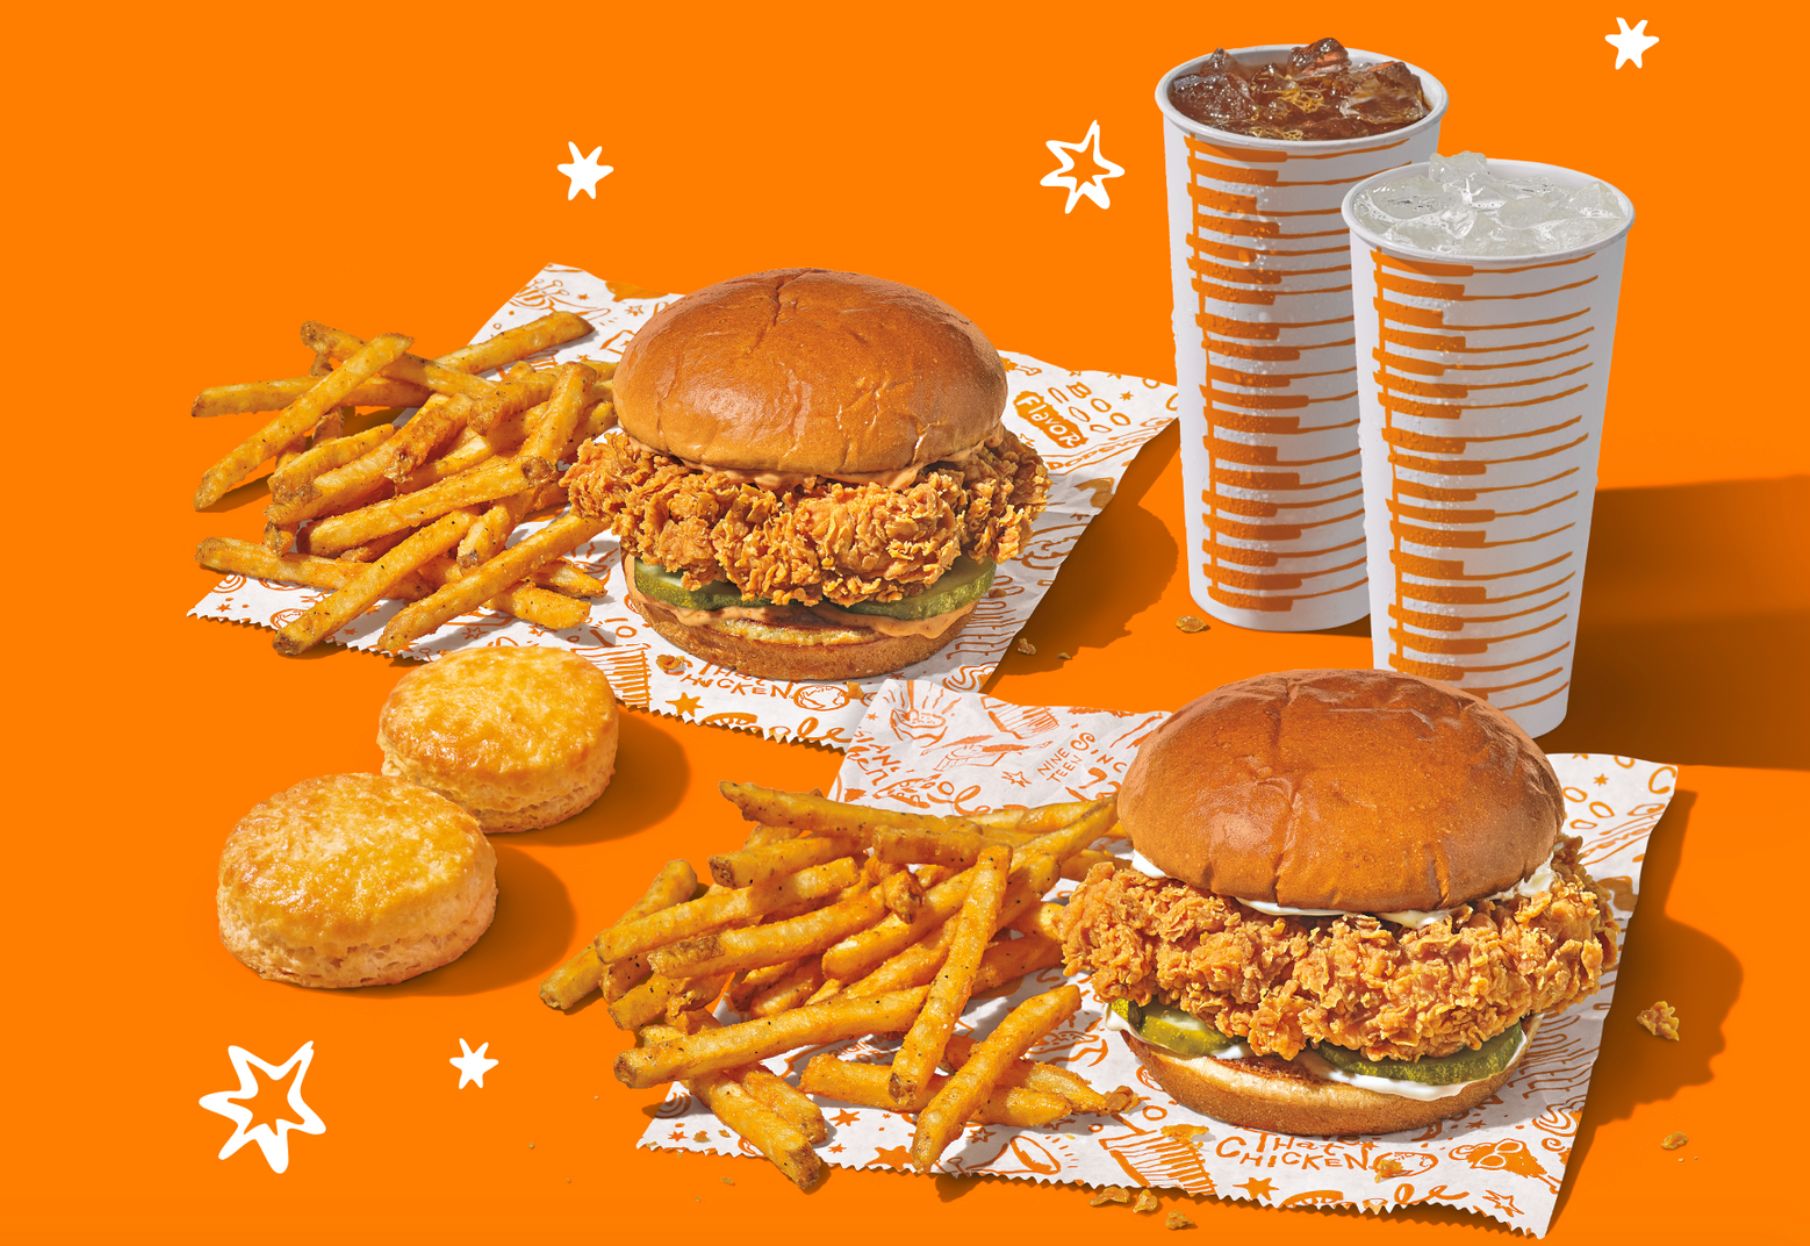 Popeyes Chicken Introduces their New $18 Double Sandwich Combo with Sandwiches, Sides & More